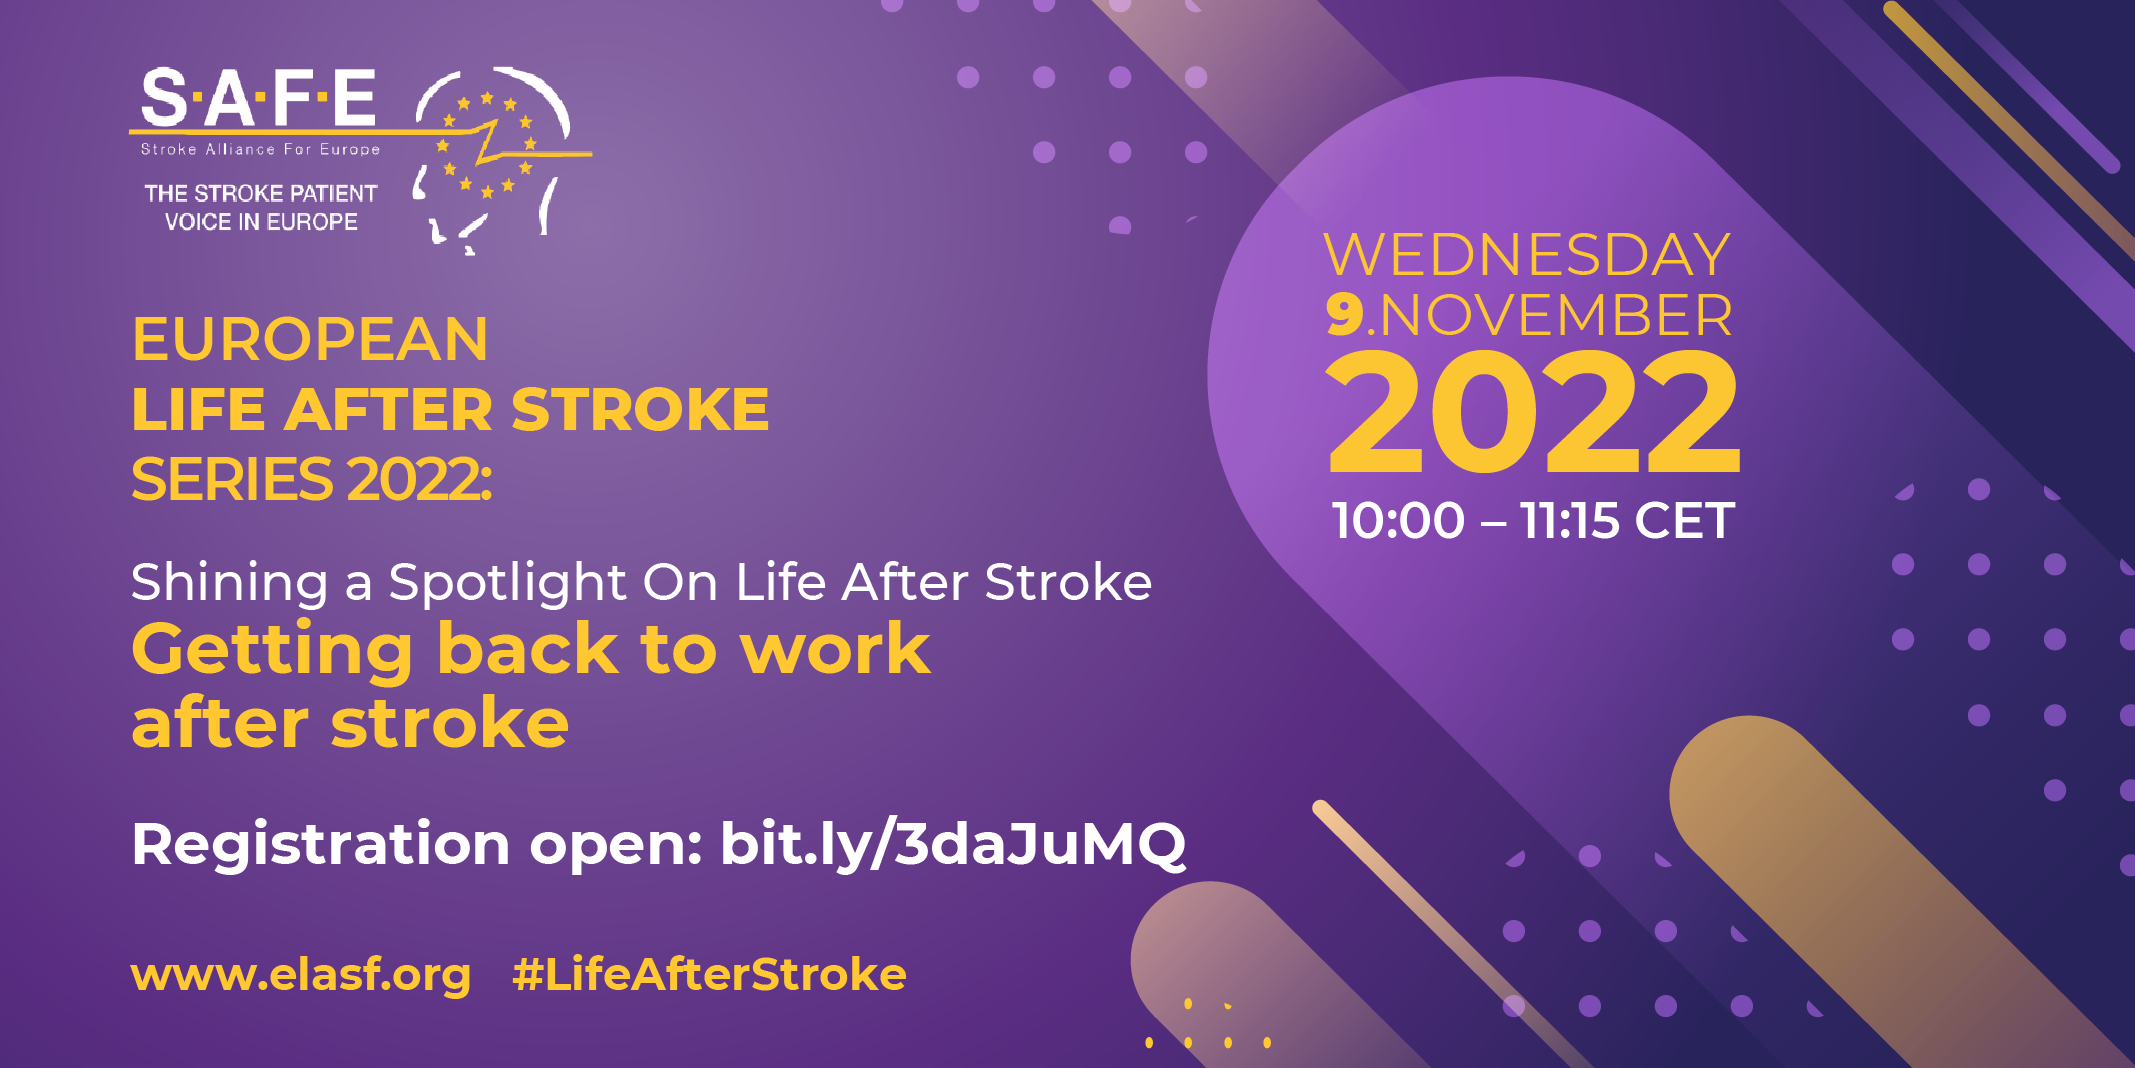 Speakers for the European Life After Stroke series confirmed, 9 November 10.00 – 11.15 CET